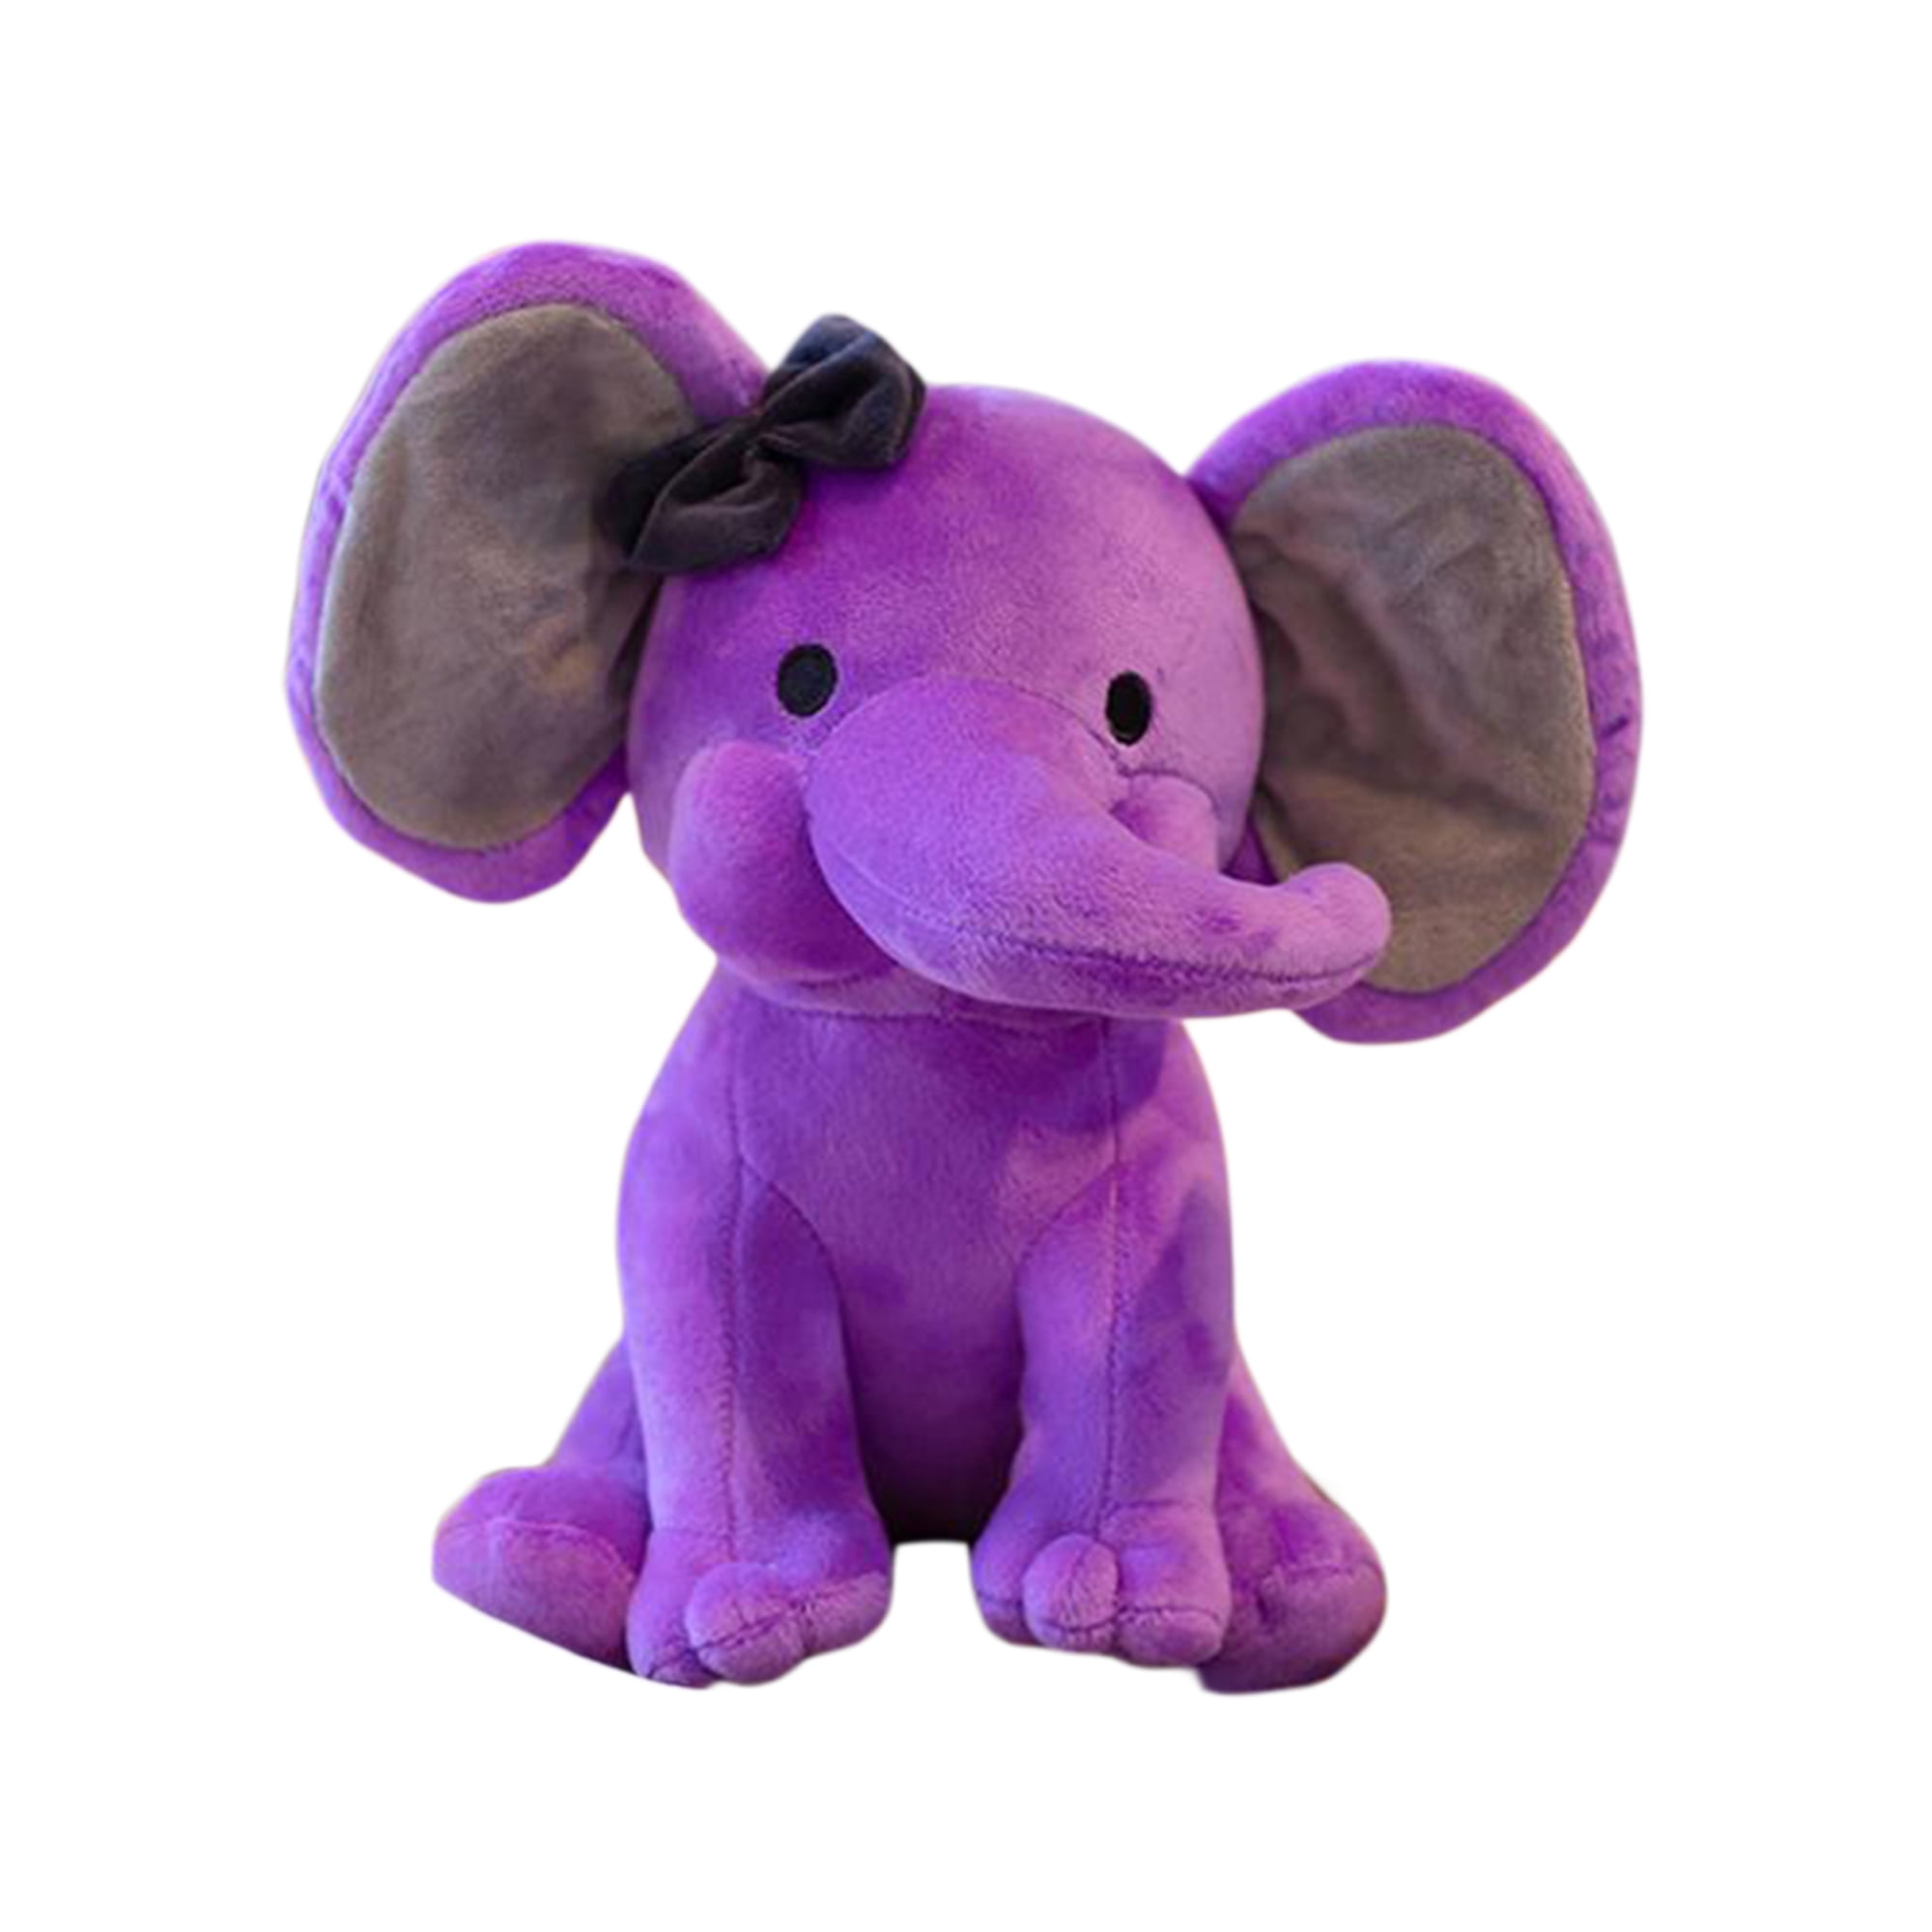 Baby 9.8 inches Elephant Plush Stuffed Animal Toy Throw Pillow for Sleeping 